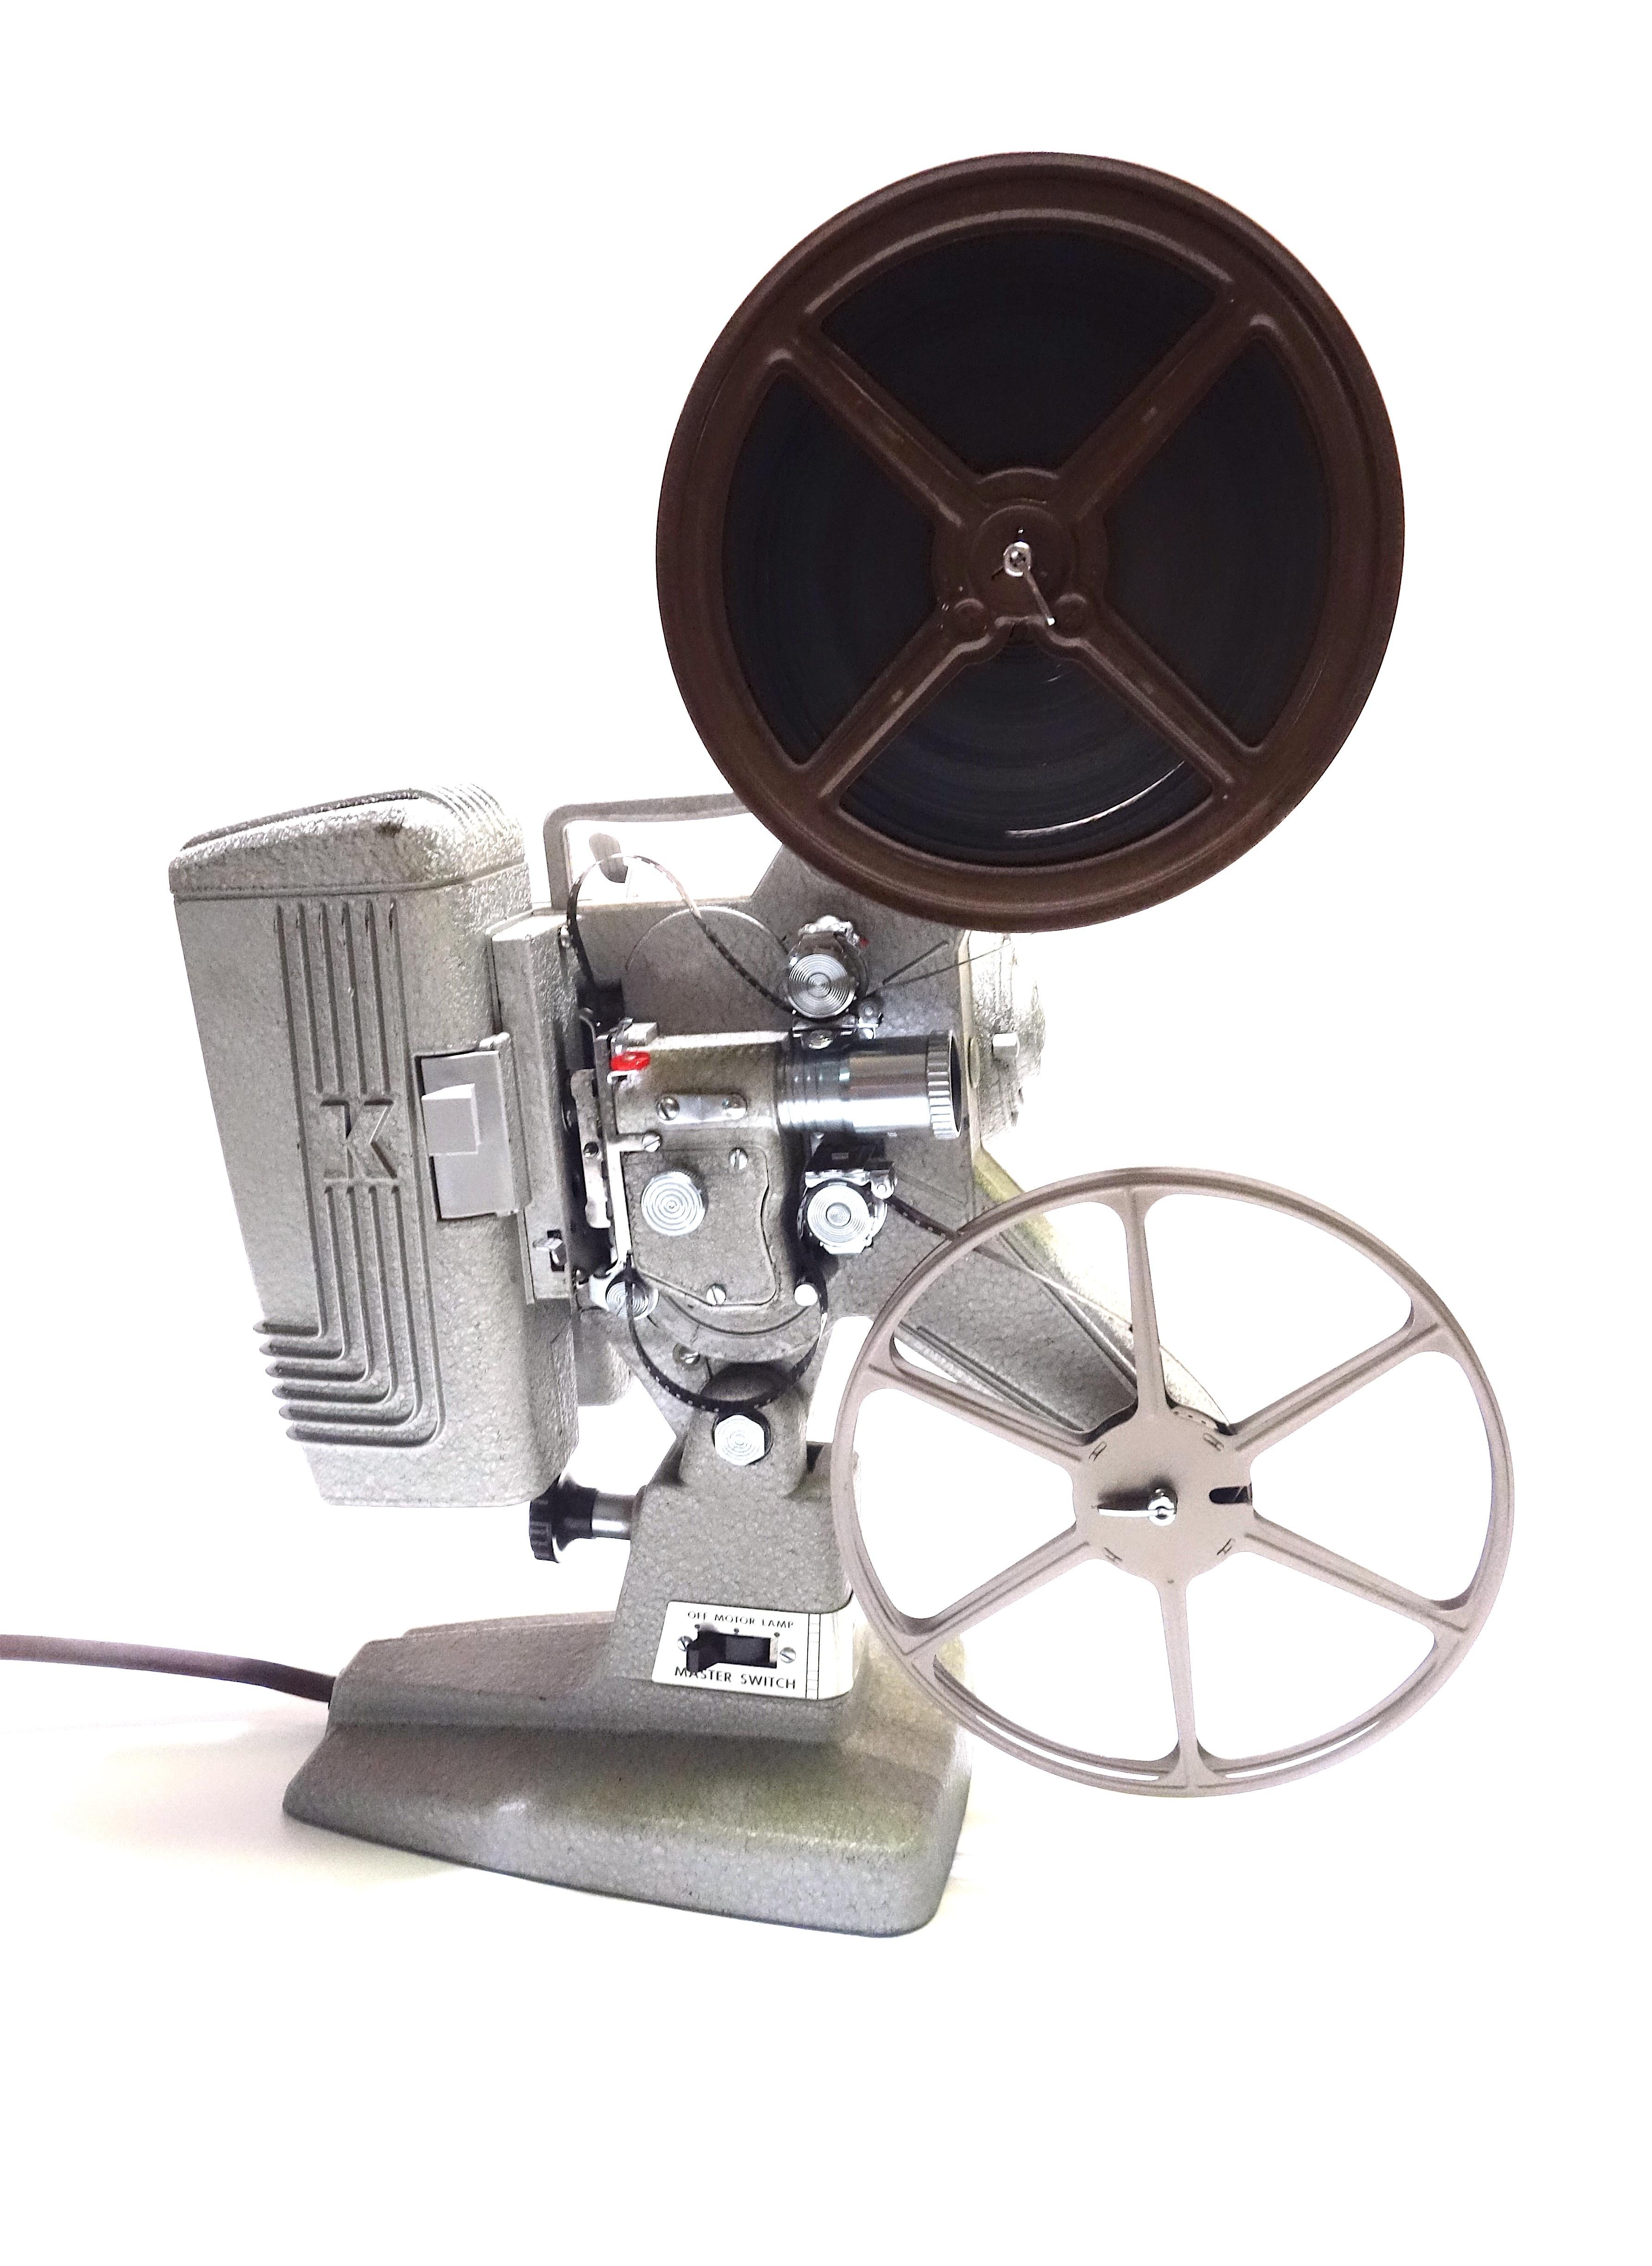 American Keystone Vintage Movie Projector circa 1950s, Pristine, with Film and Reels, Wow For Sale